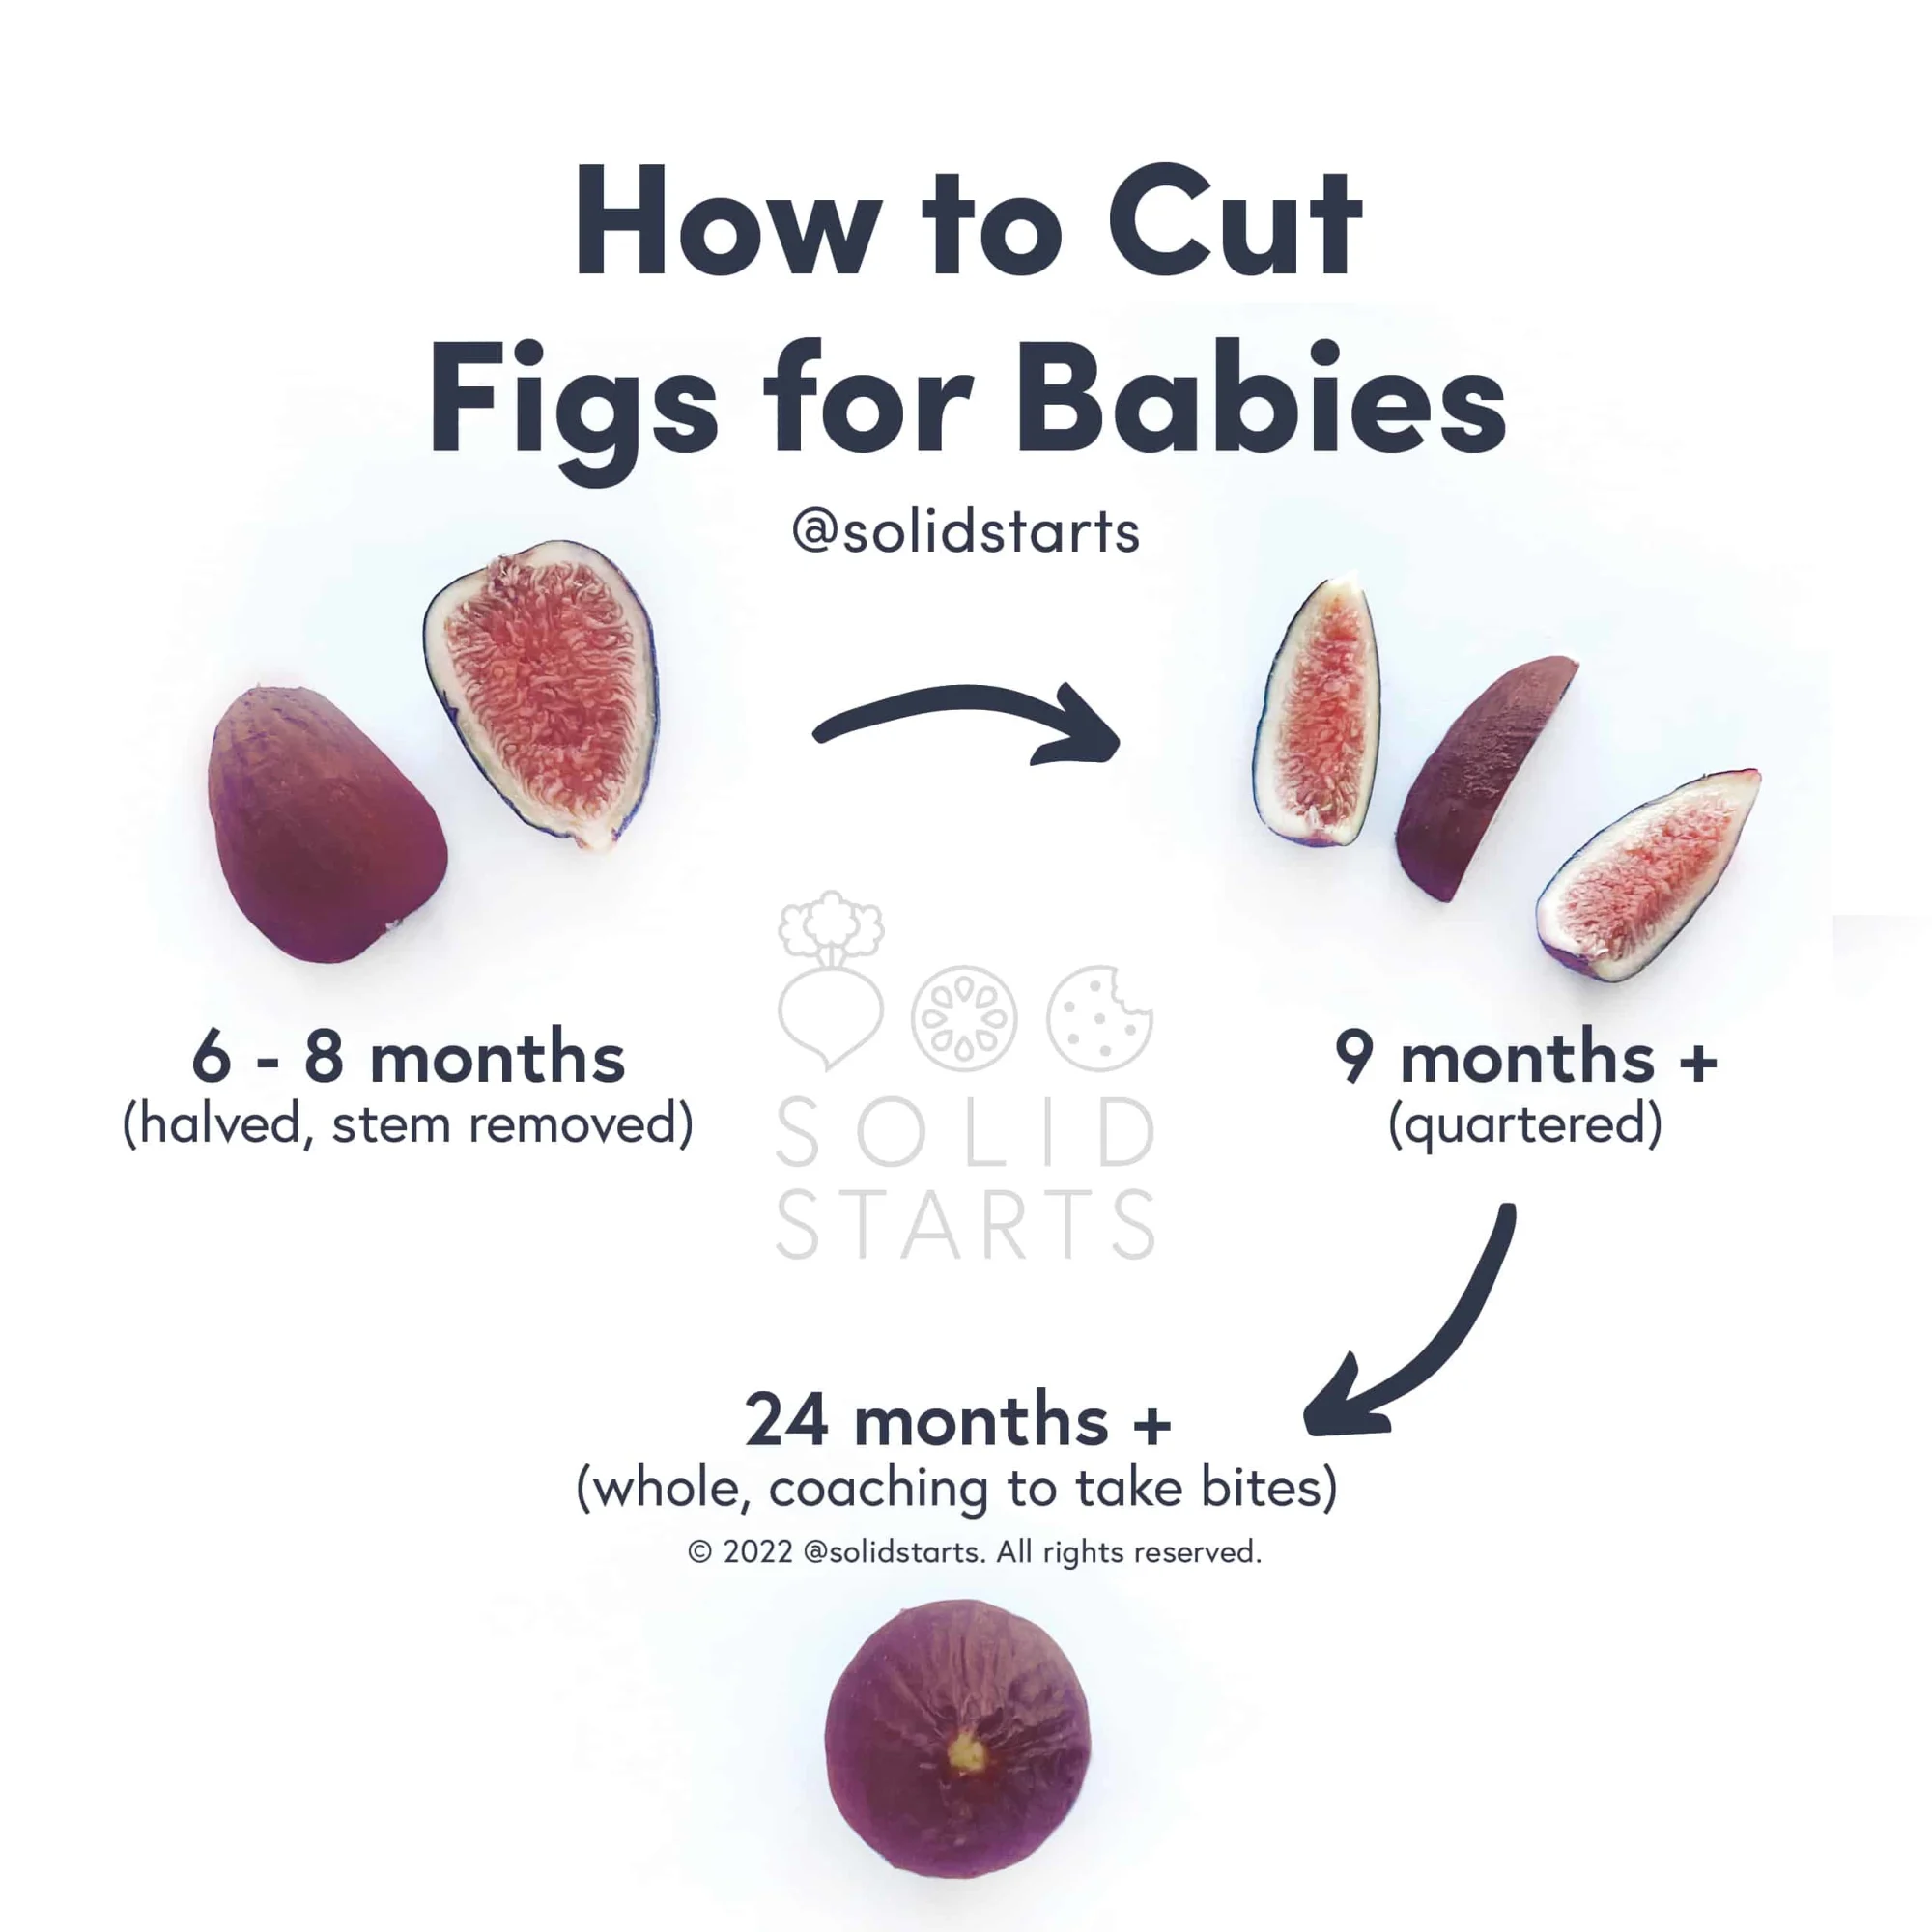 a Solid Starts infographic with the header How to Cut Figs for Babies: halved with stem removed for 6-8 mos, quartered for 9 mos+, whole, with coaching for 24 mos+